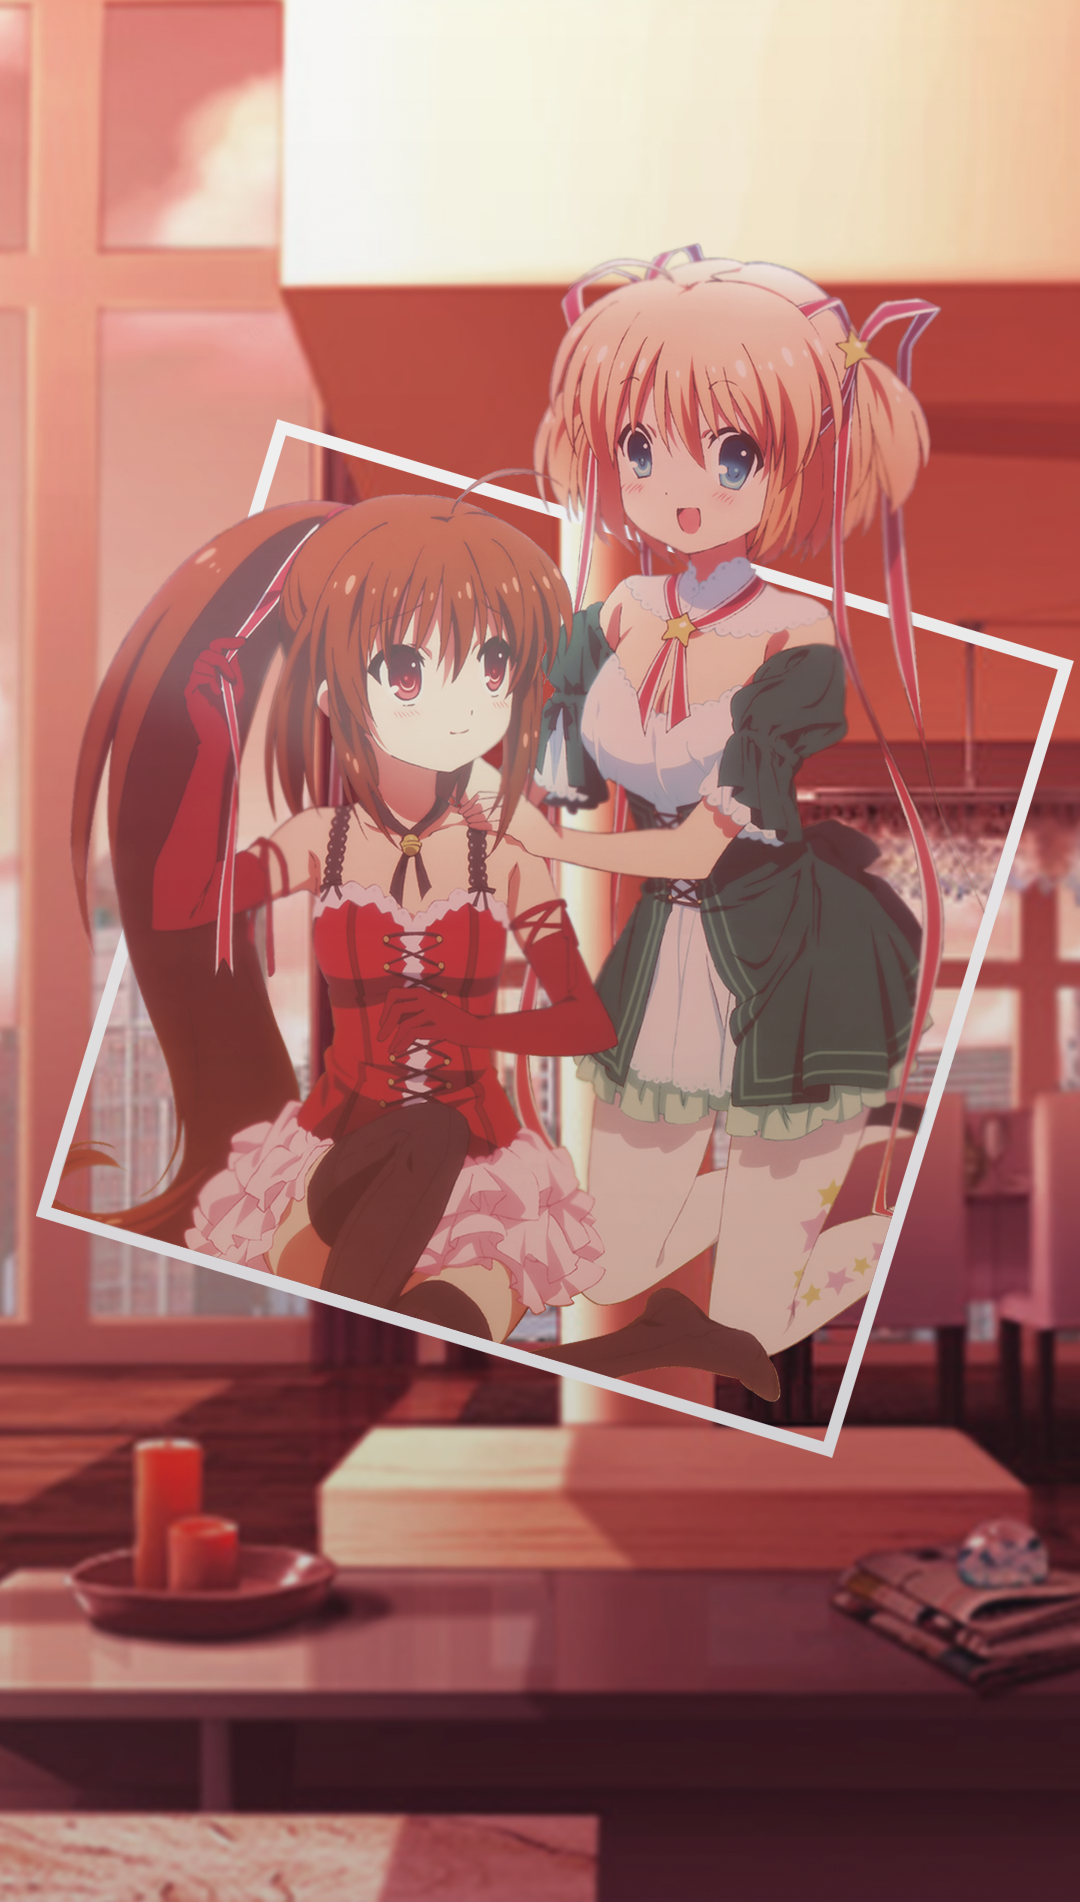 Anime 1080x1902 anime girls anime picture-in-picture